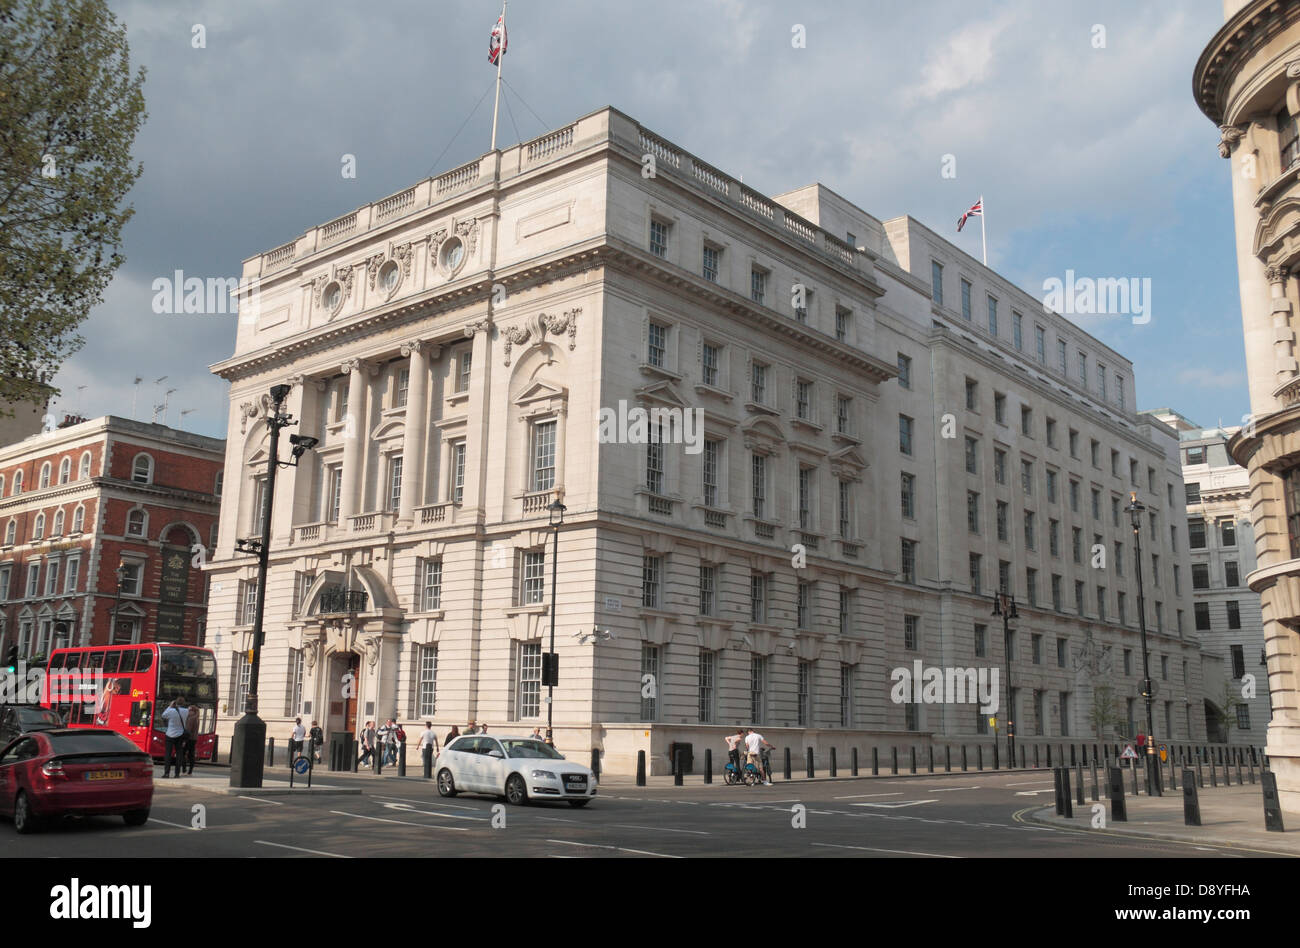 The Department of Energy & Climate Change (DECC) headquarters, Whitehall Place and Whitehall, London, UK. Stock Photo